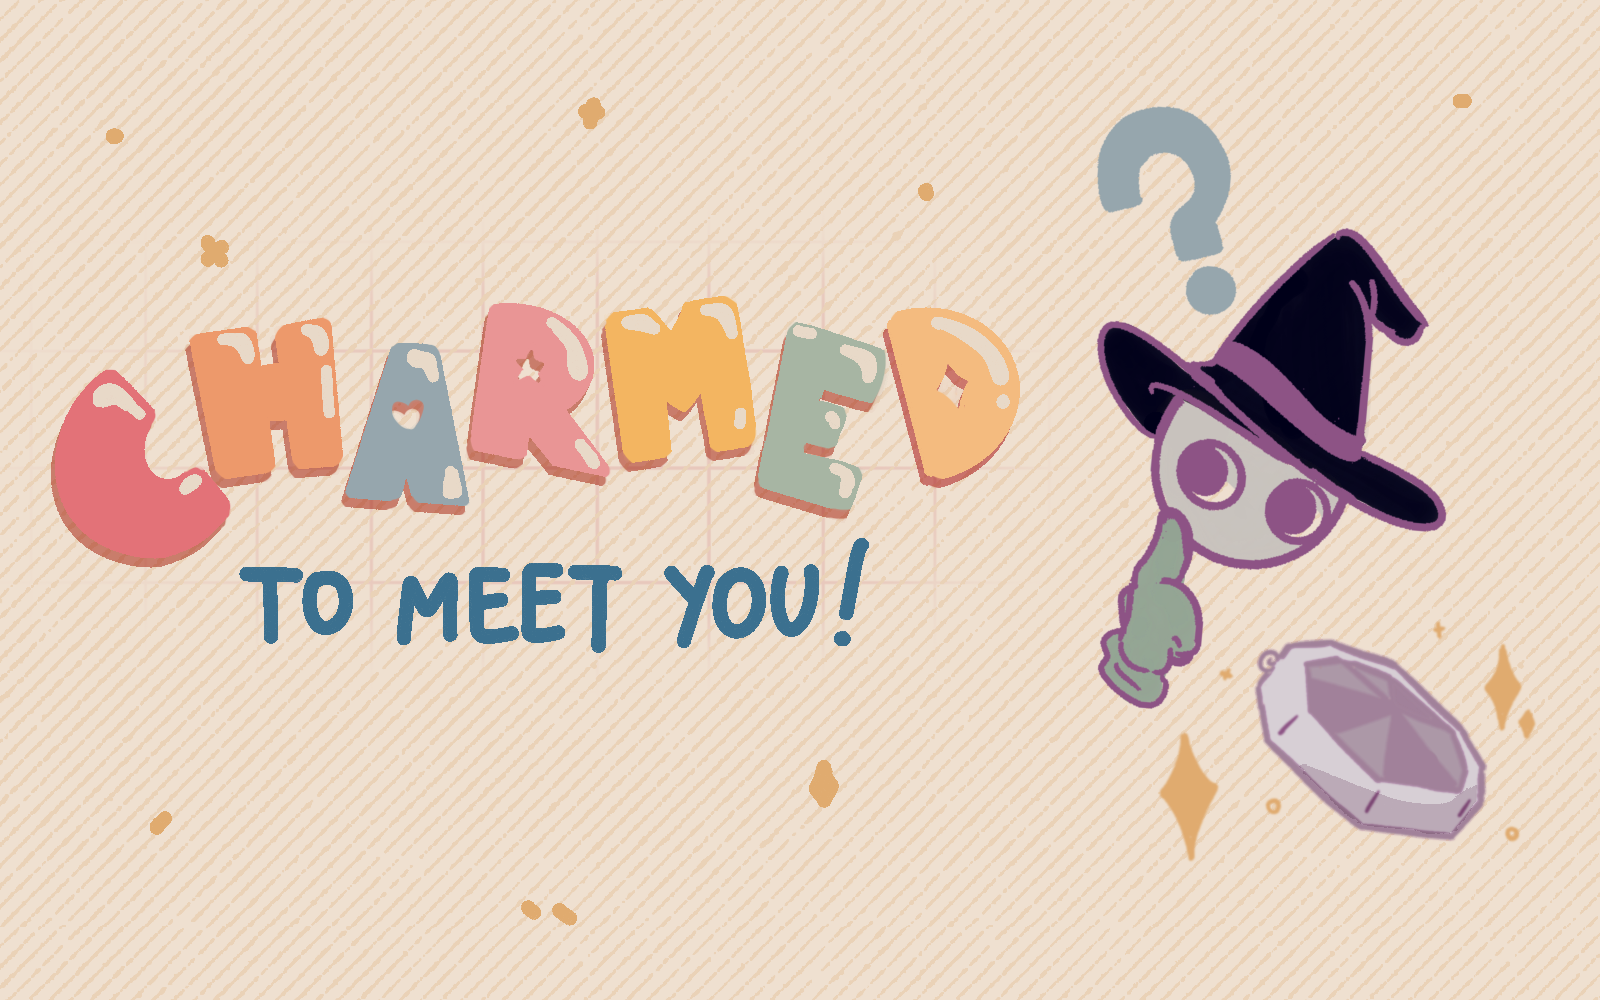 Charmed To Meet You!